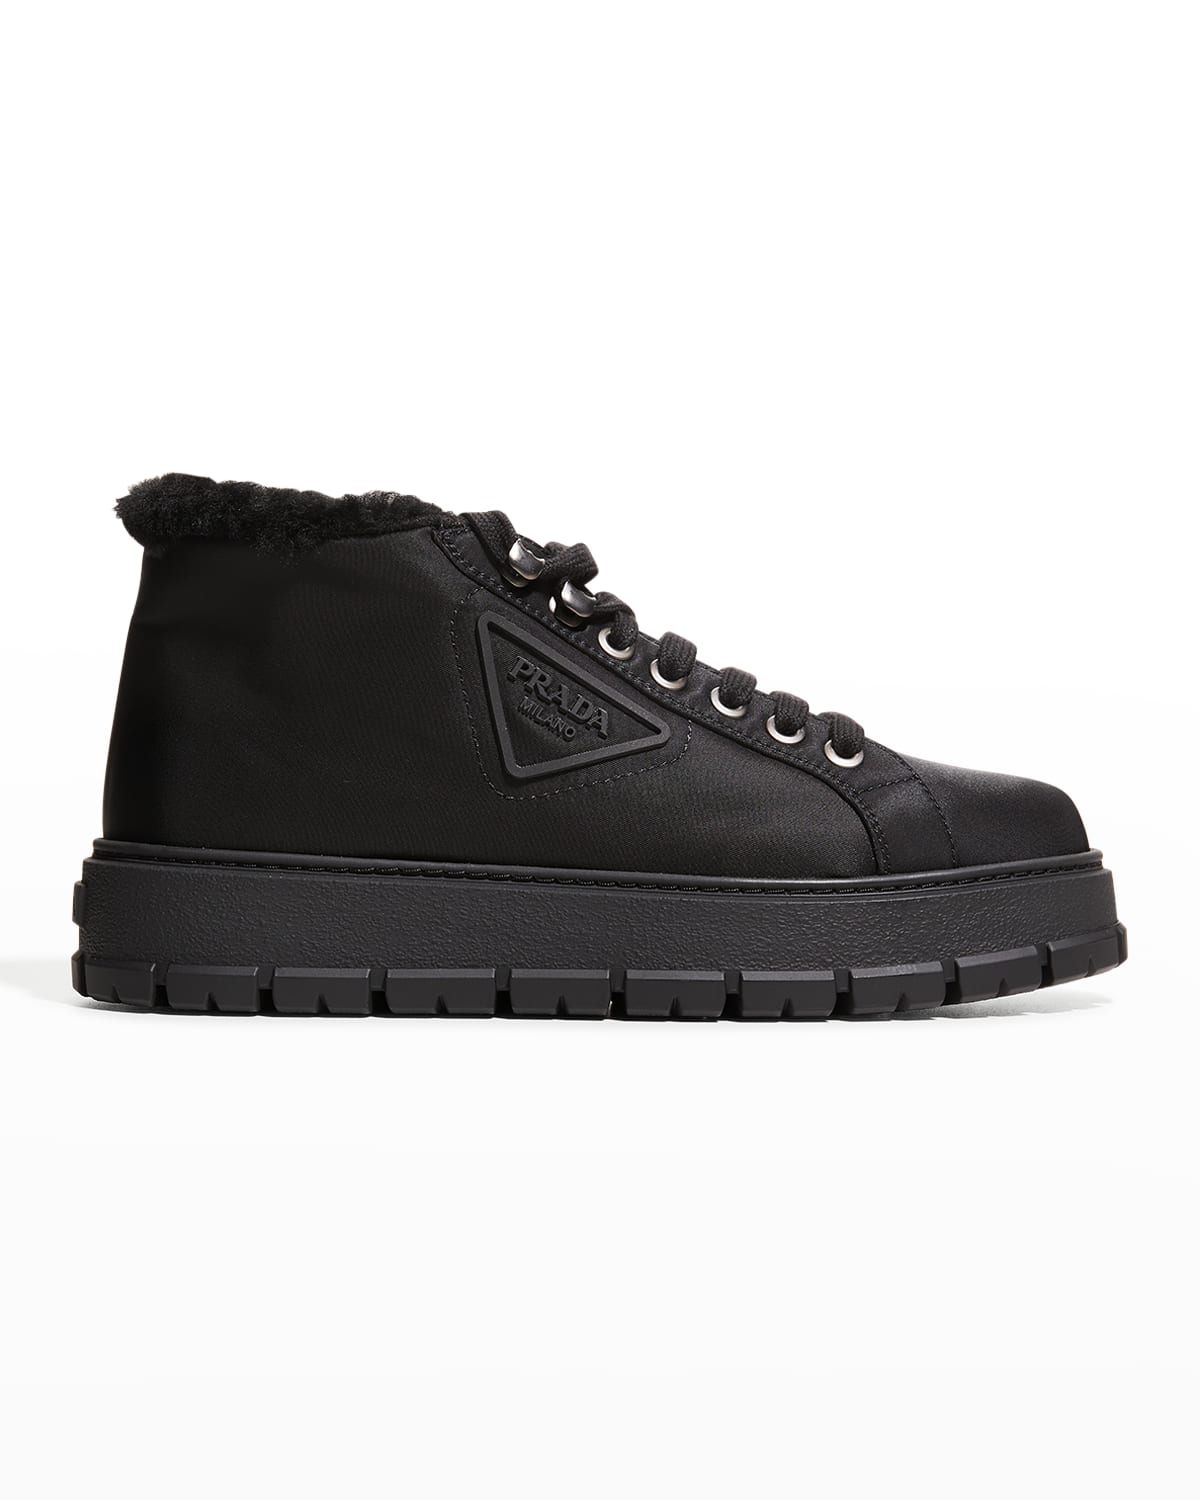 Nylon Shearling Mid-Top Sneakers